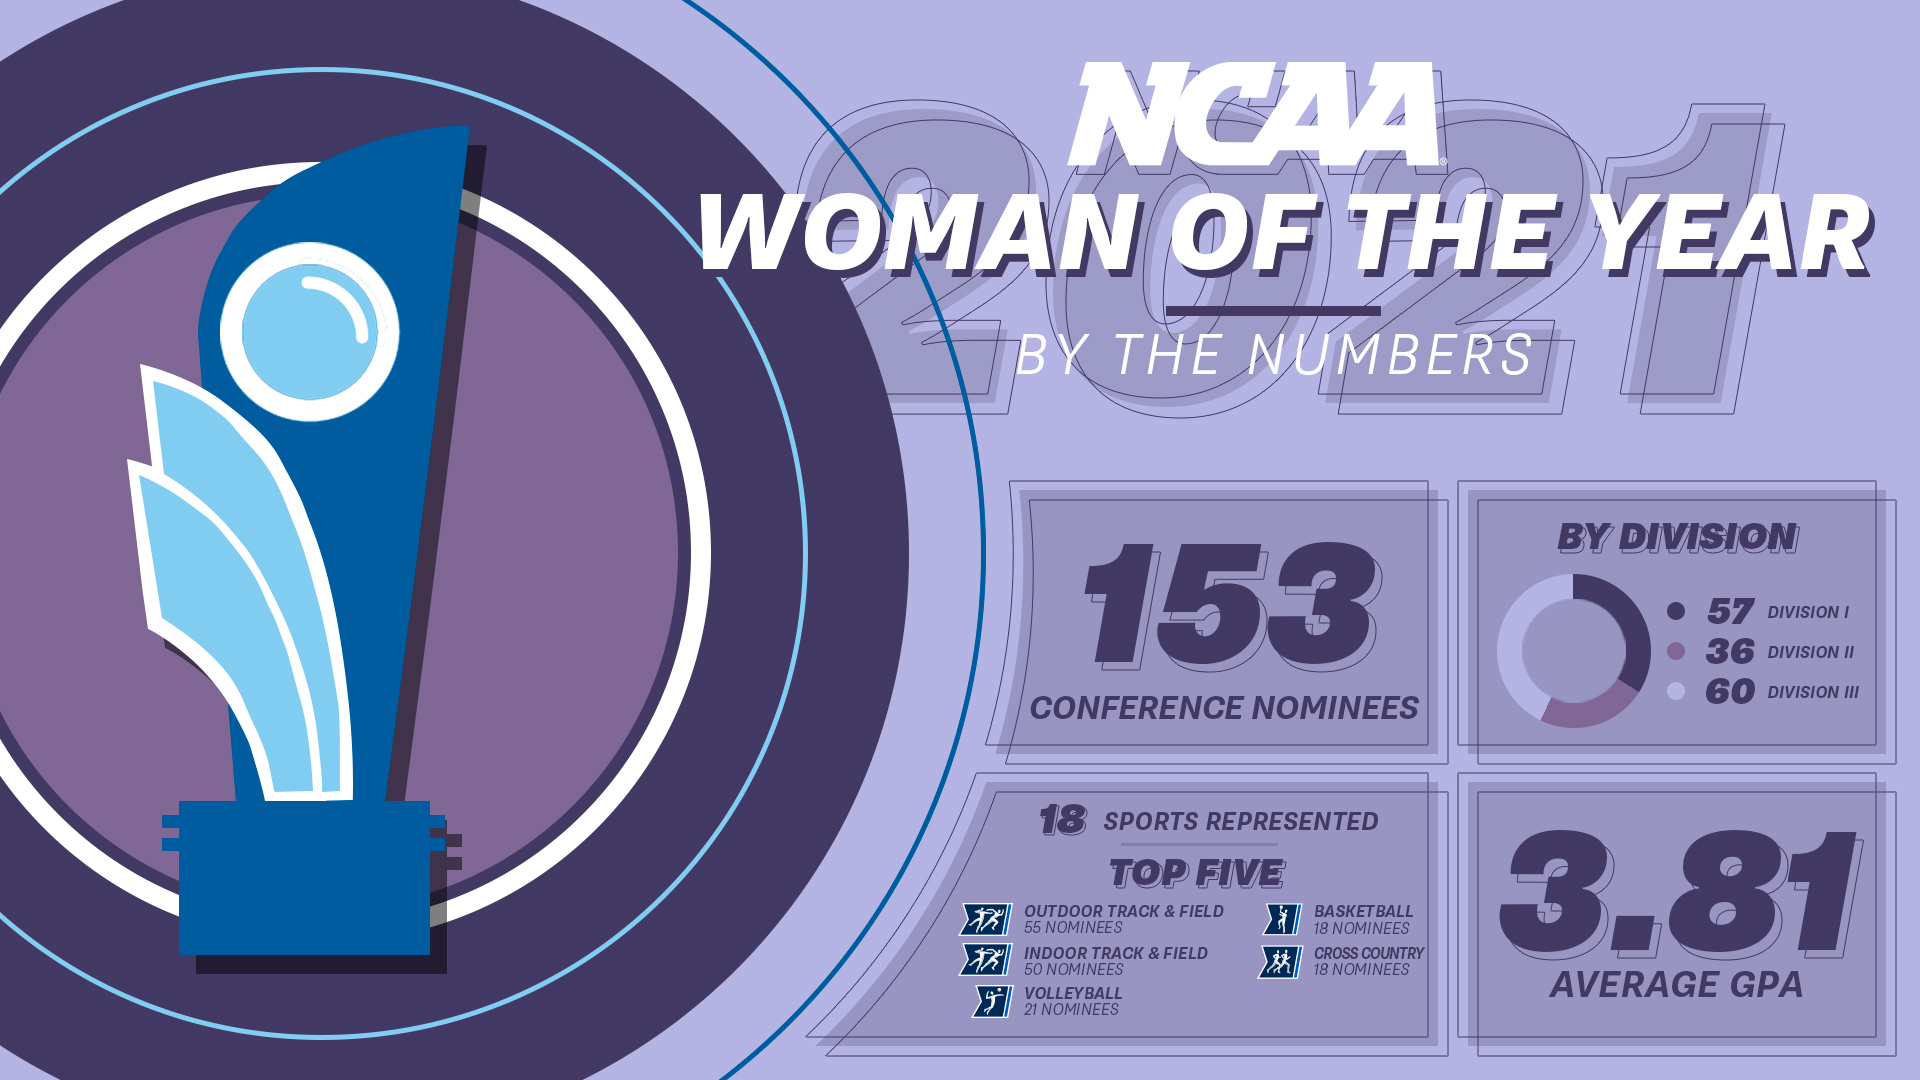 NCAA announces 153 nominations for Woman of the Year Award